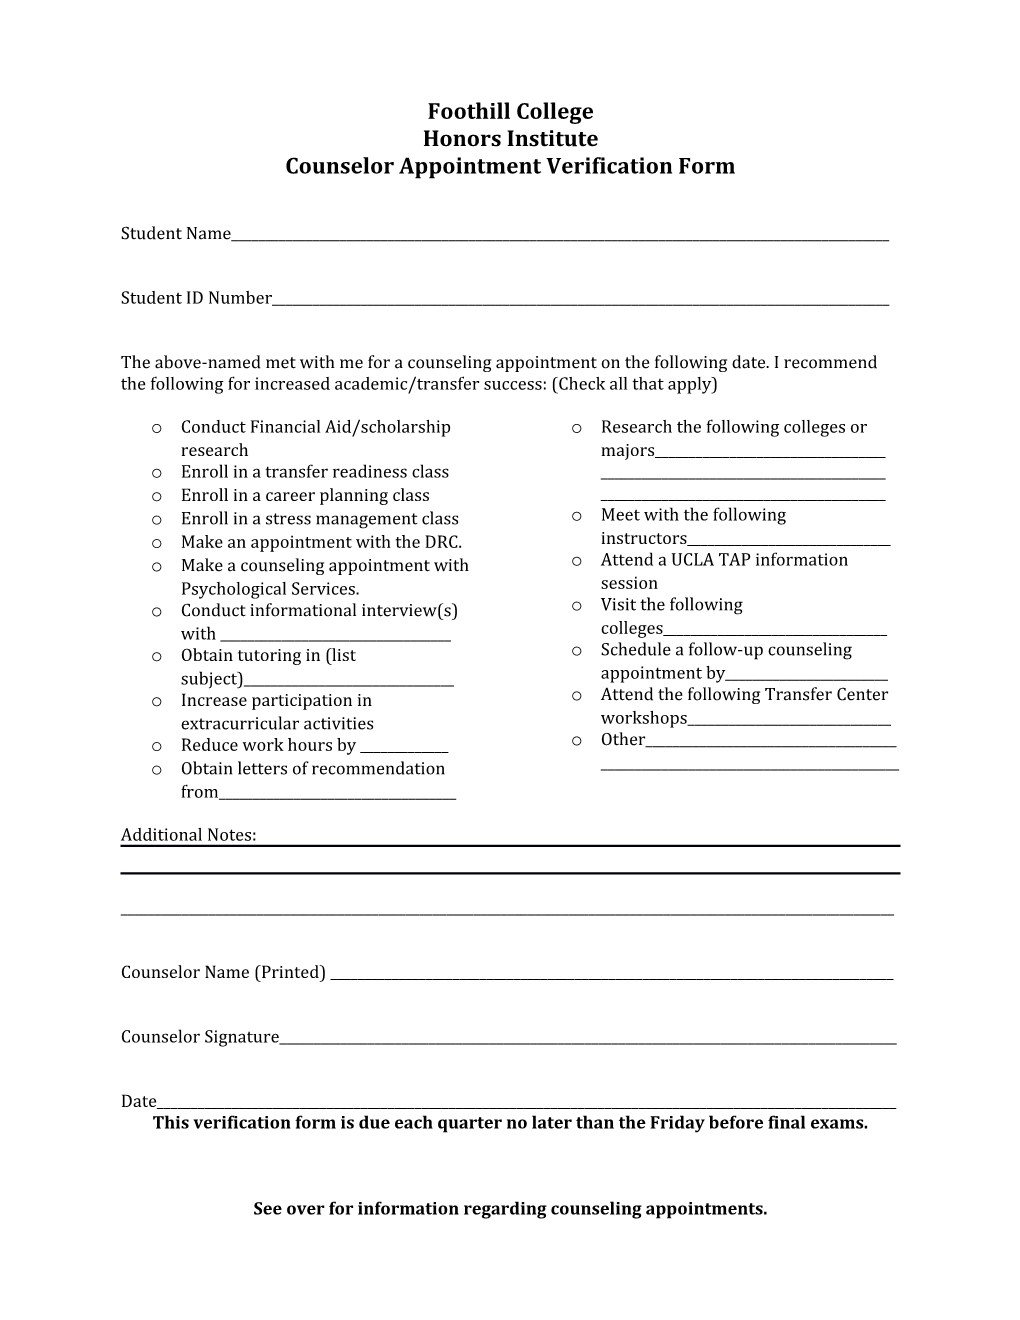 Counselor Appointment Verification Form